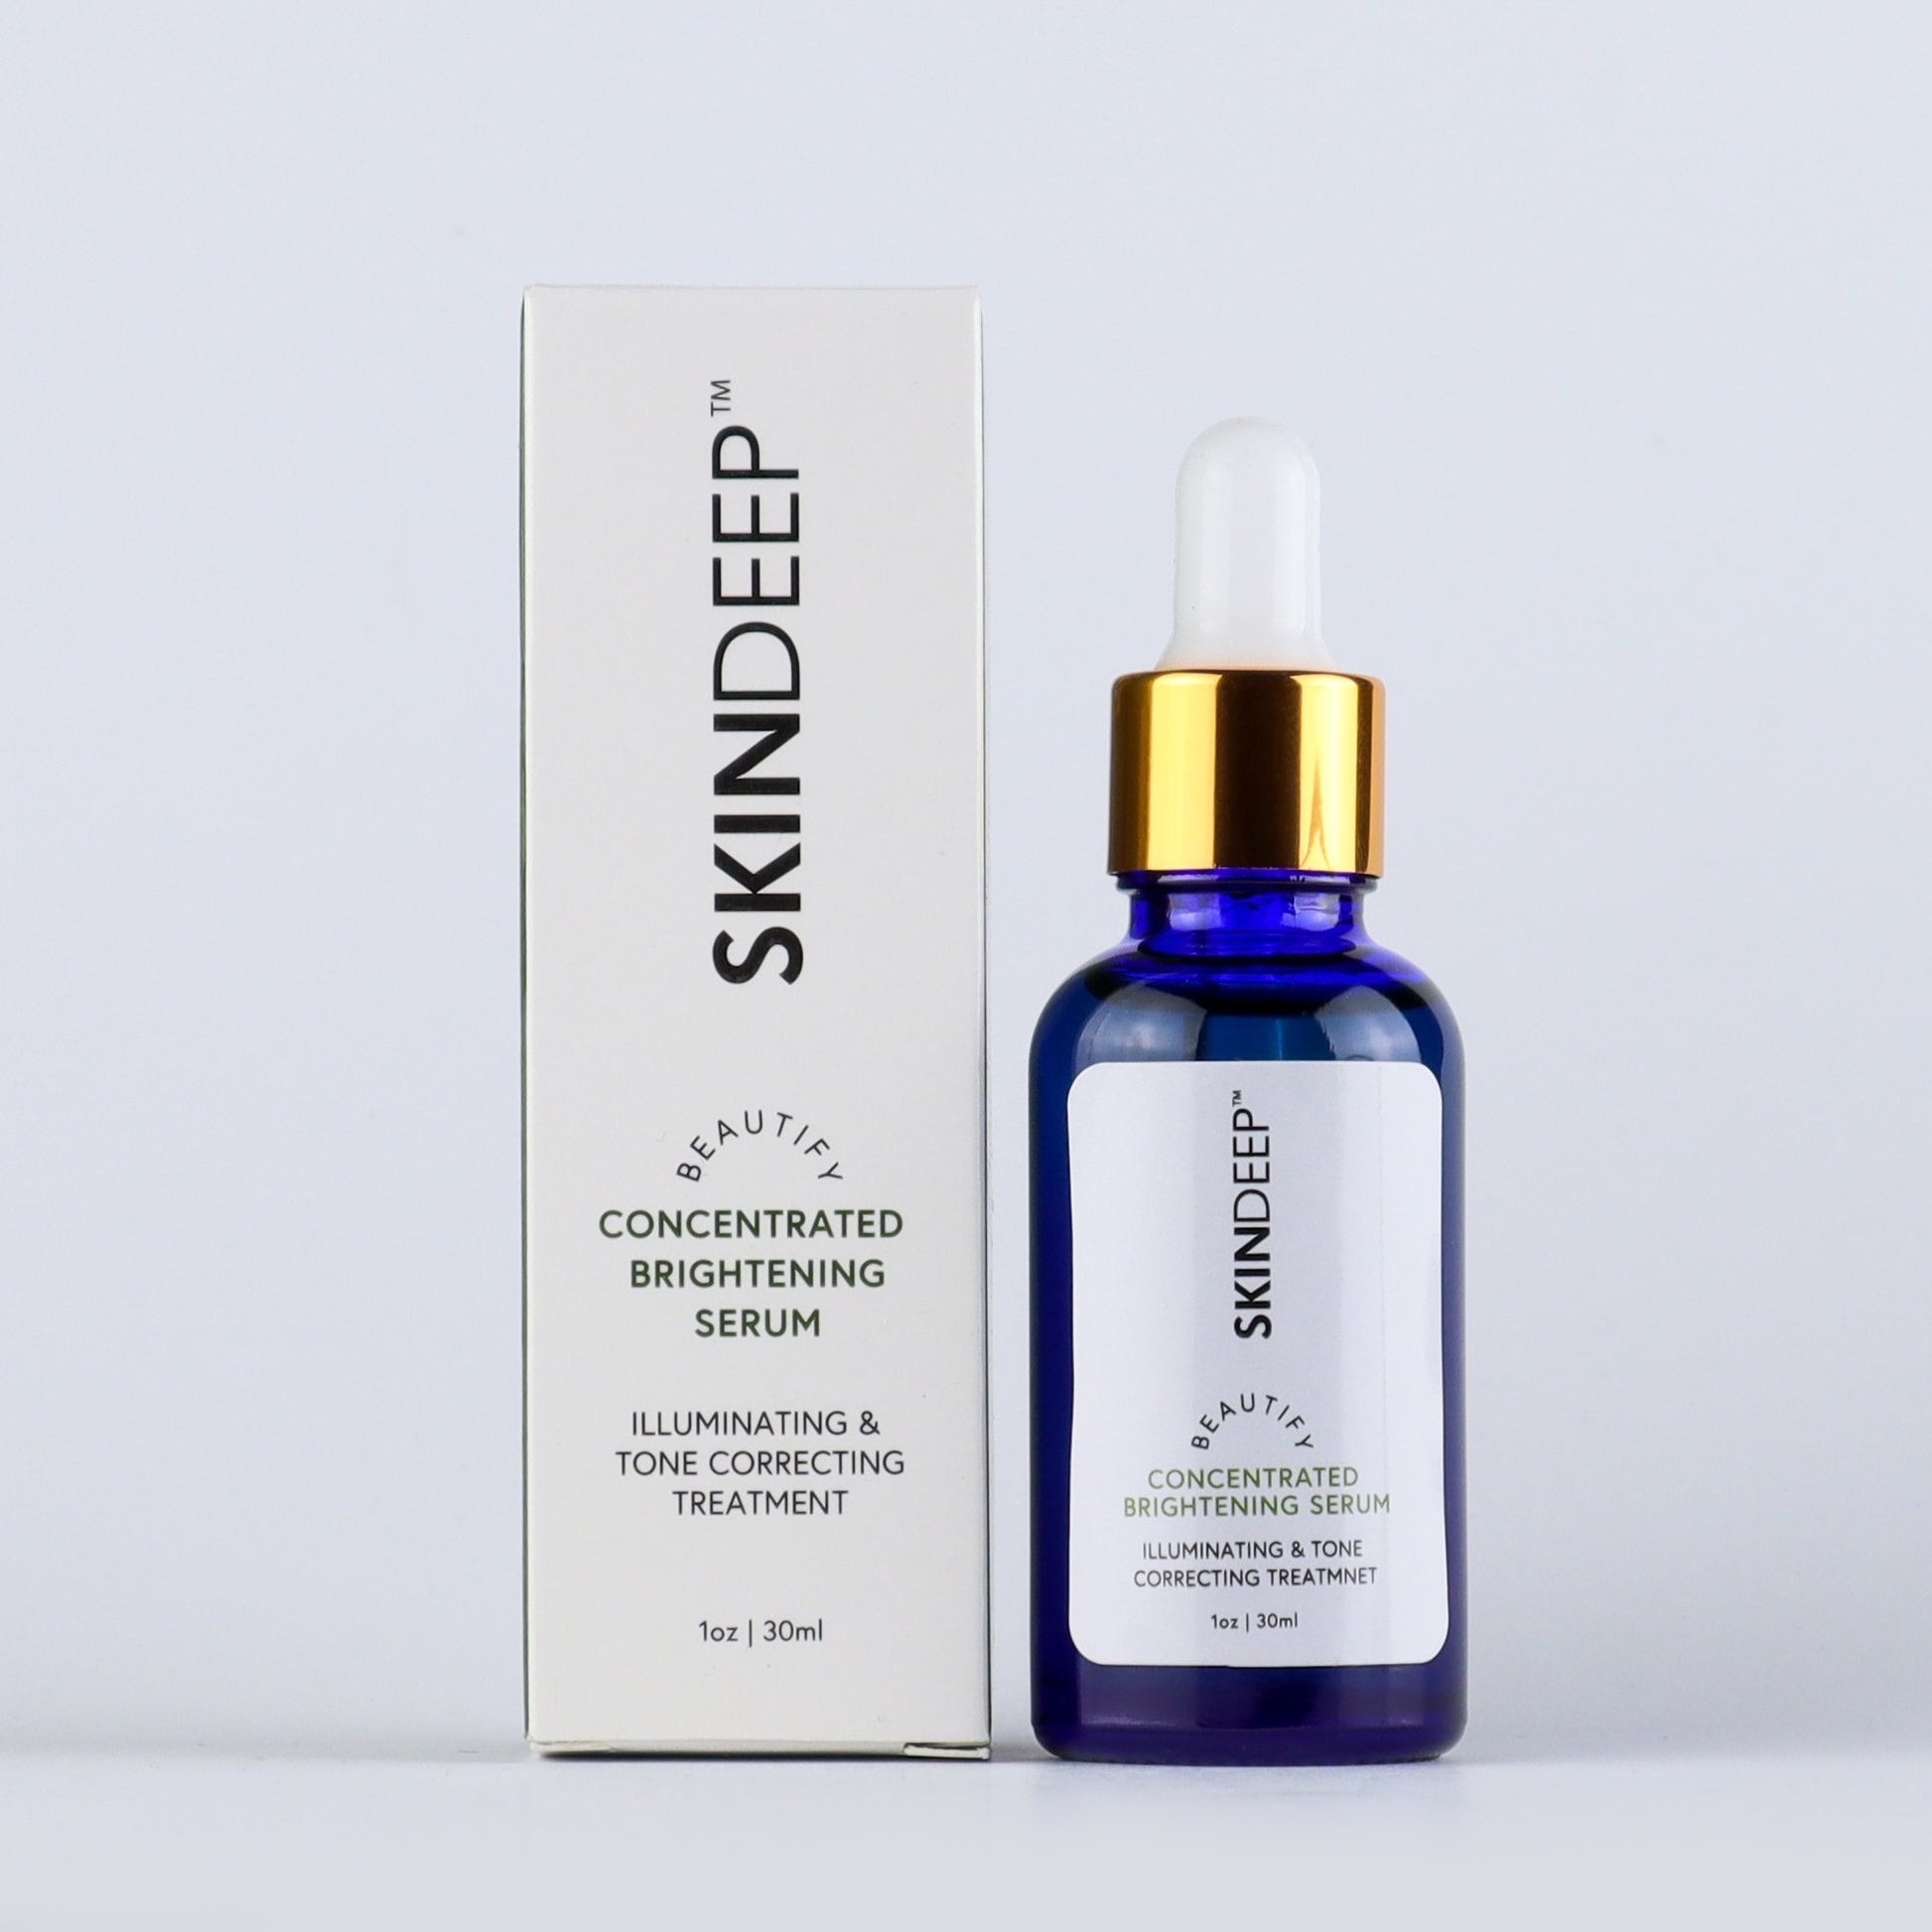 Skin deep concentrated brightening serum - illuminating and tone correcting treatment